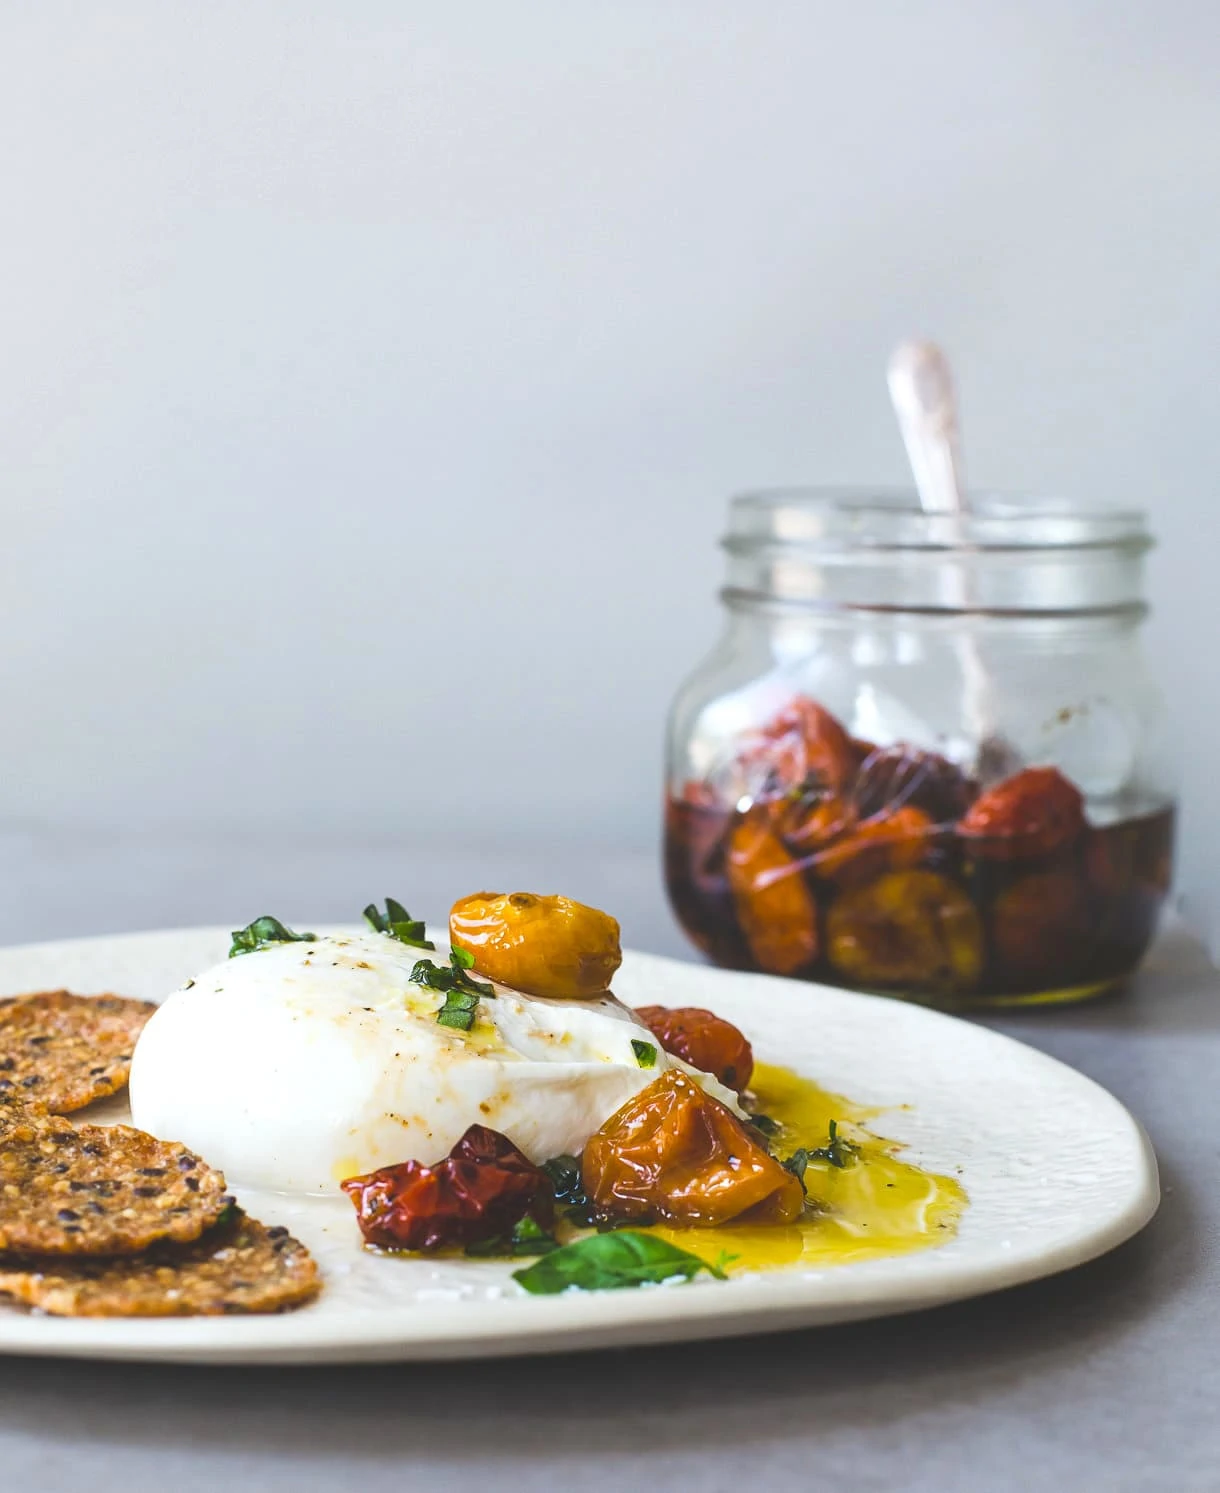 Burrata with Slow Roasted Cherry Tomatoes and Olive Oil